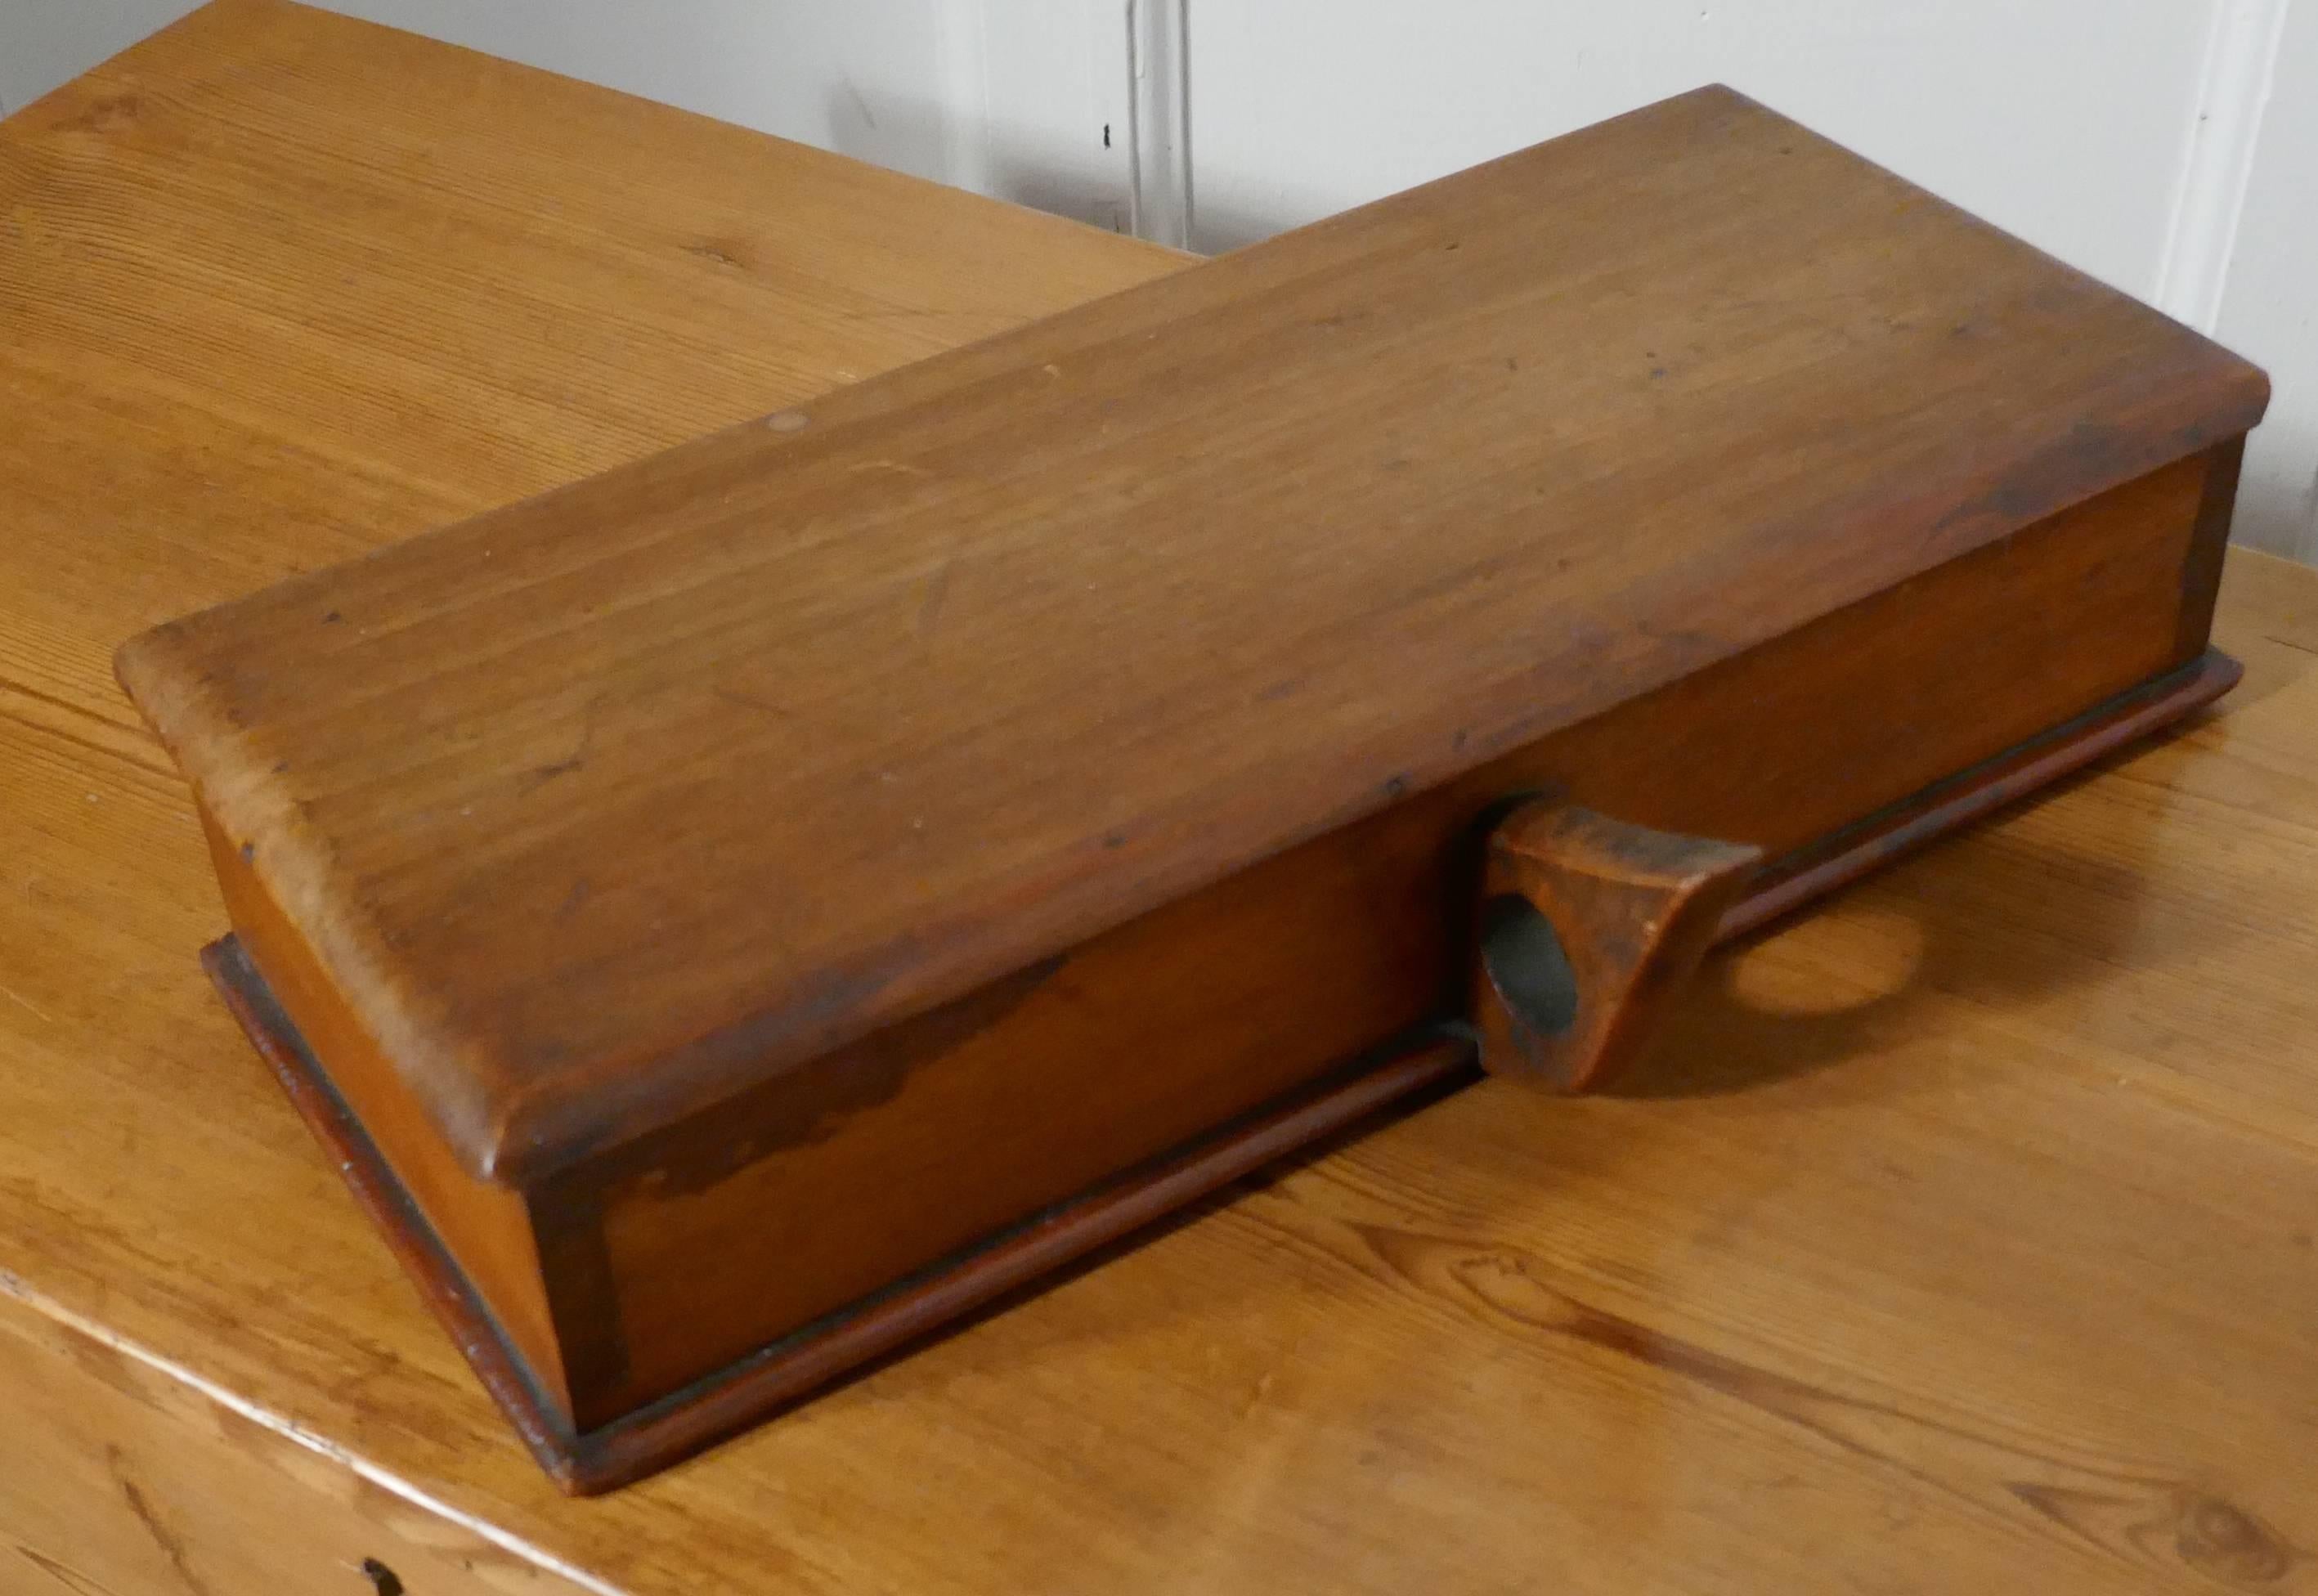 Victorian mahogany cigar box

This is rare item, the cigar box is the type used by a butler or waiter, it is made in Mahogany with handle at the back, the lid lifts towards the handle revealing four sections numbered in gold for the cigars and at